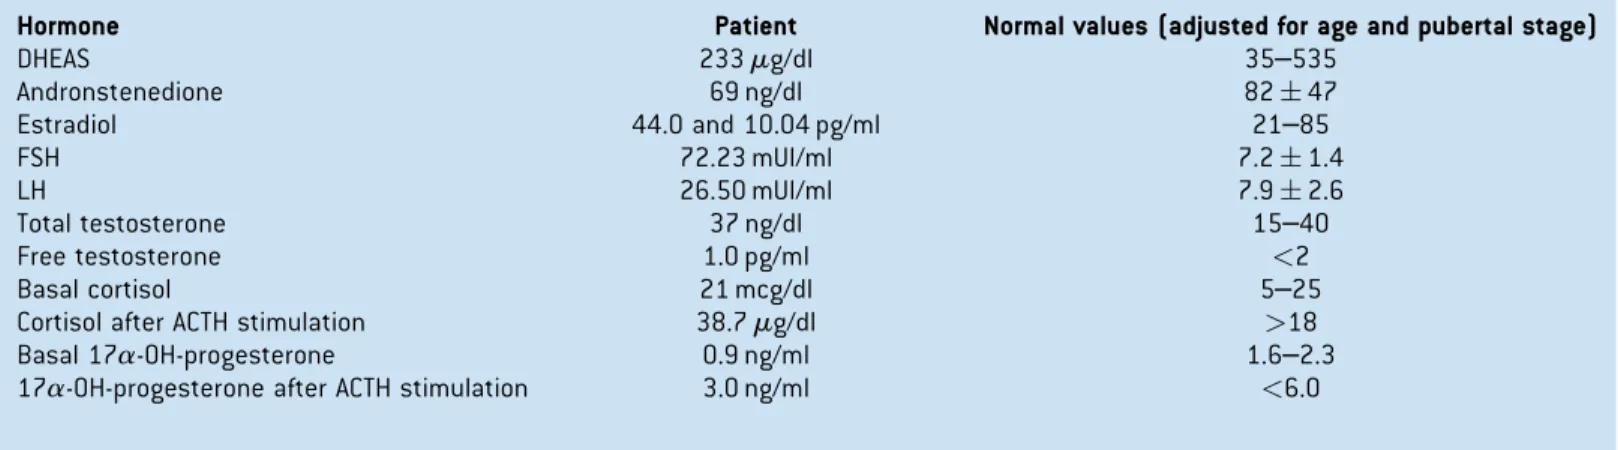 TABLE I. Endocrine Evaluation of the Patient With Premature Ovarian Failure (POF)